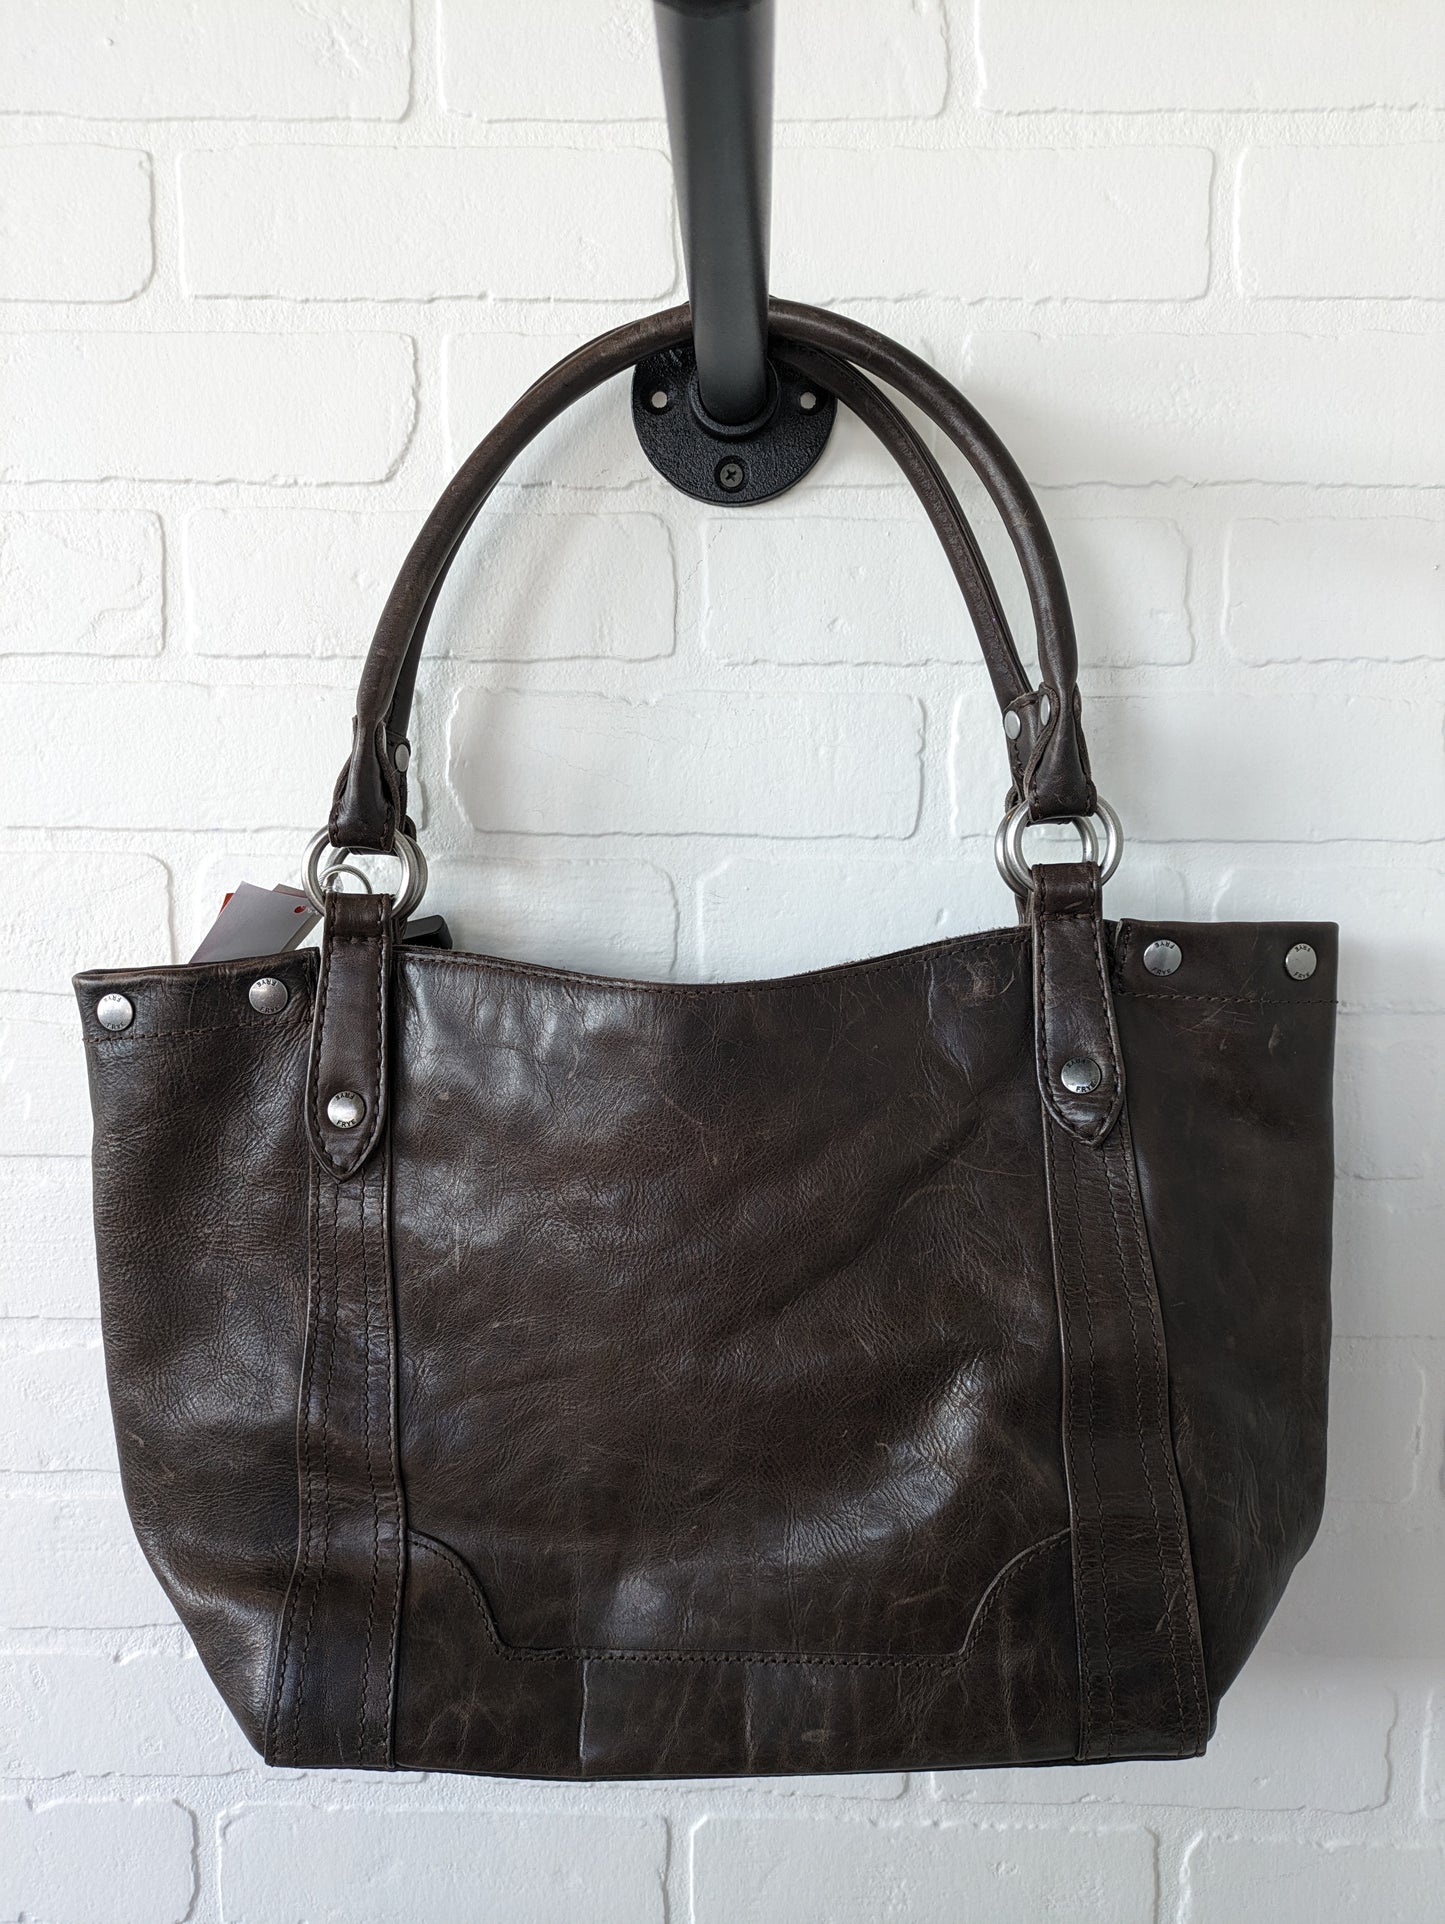 Tote Leather By Frye  Size: Large